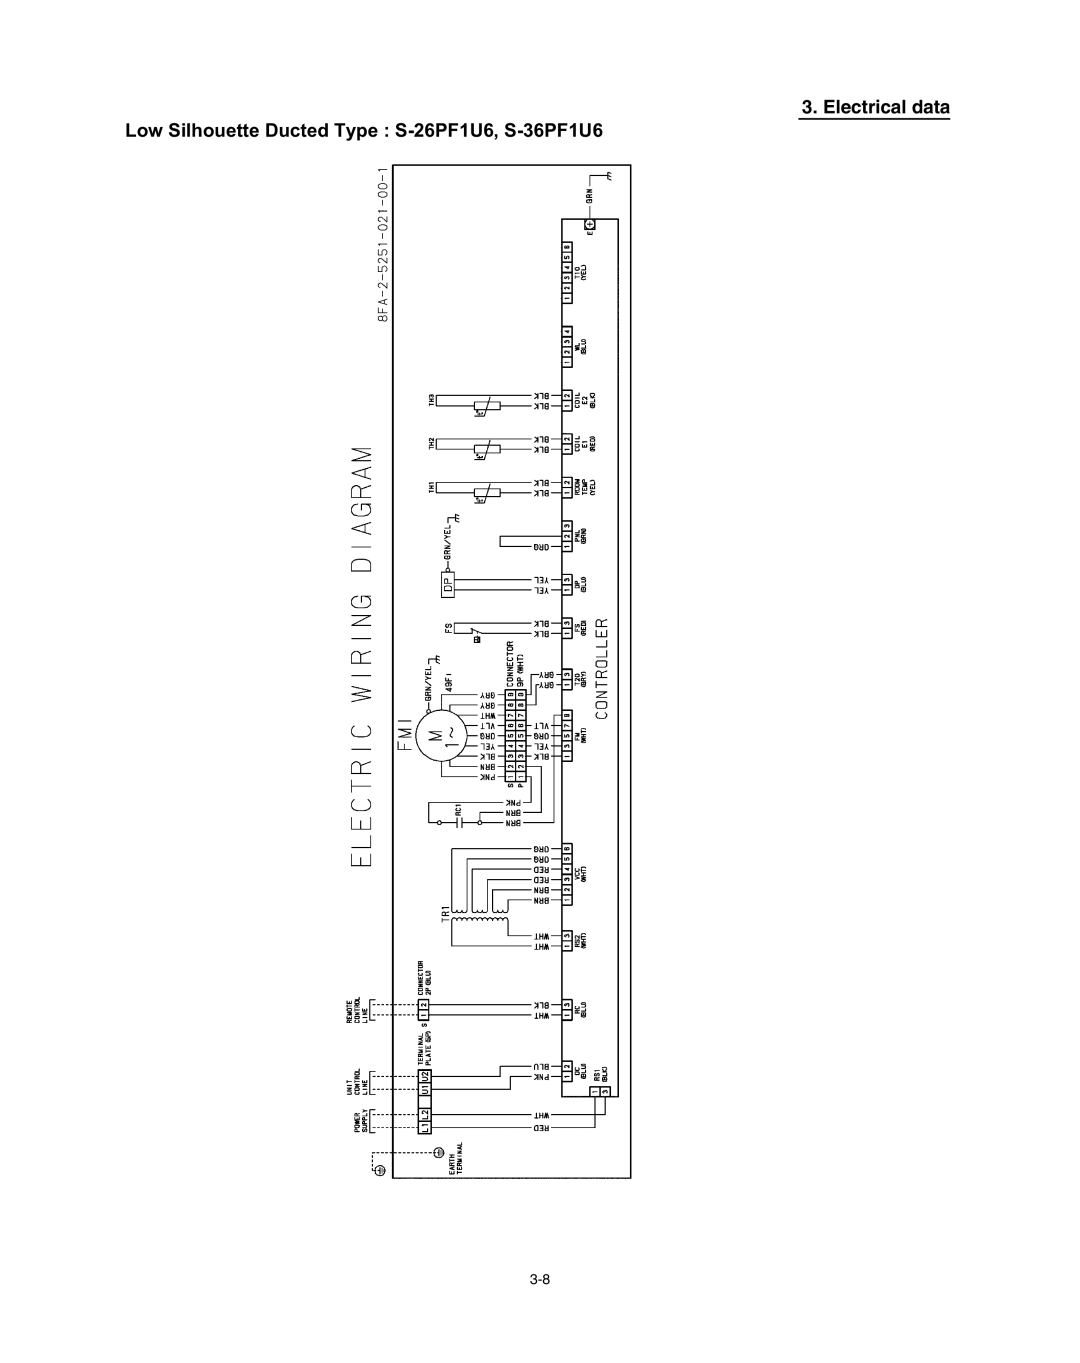 Panasonic R410A service manual Electrical data, Low Silhouette Ducted Type : S-26PF1U6, S-36PF1U6 